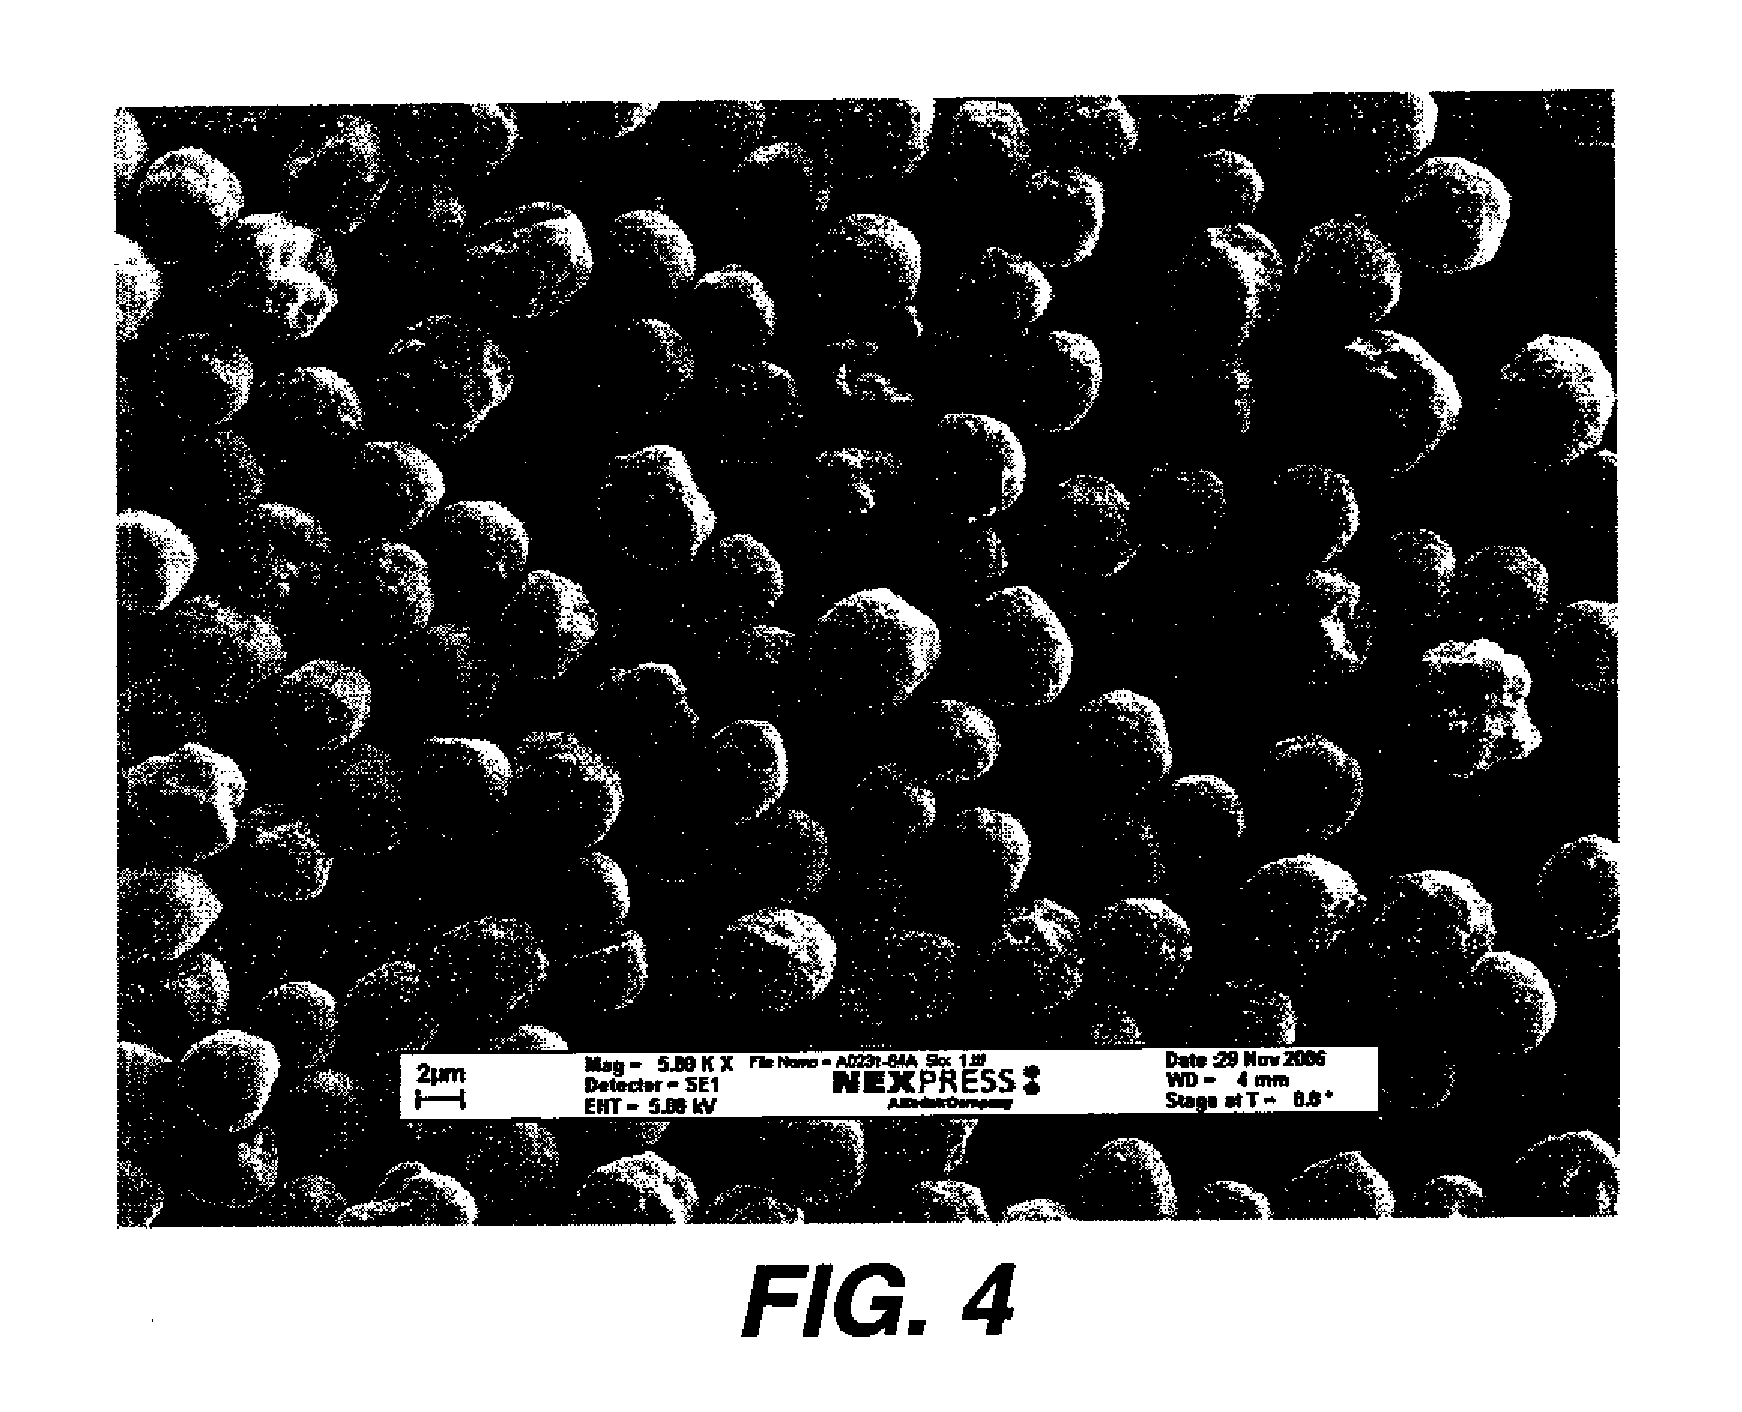 Toner particles of controlled morphology